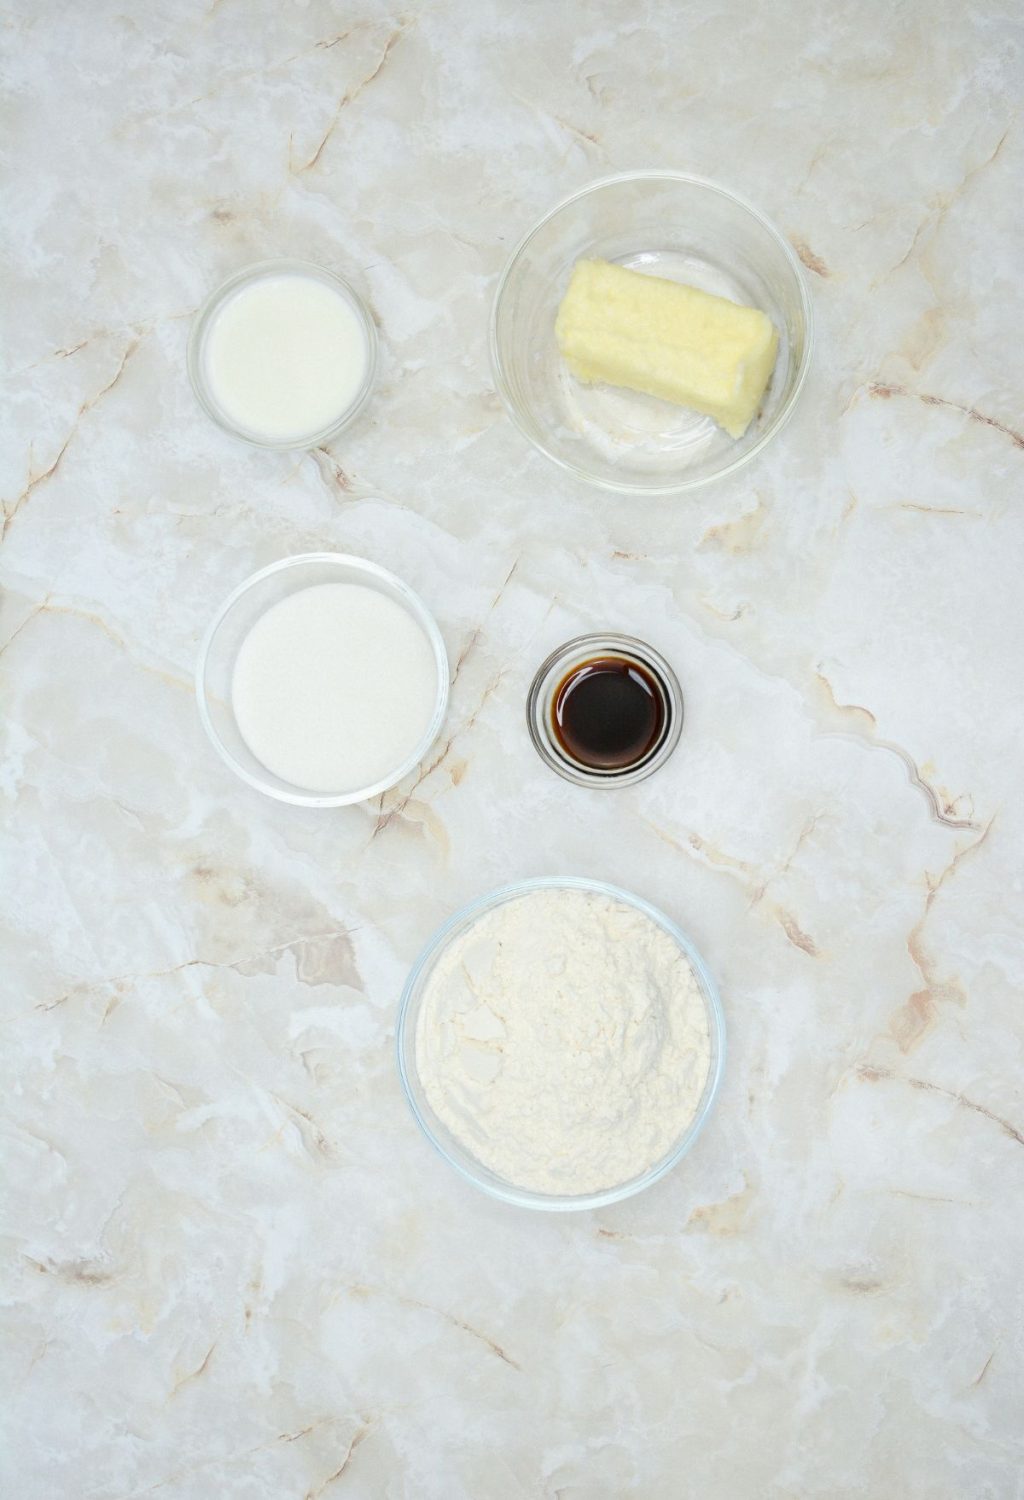 The ingredients for a cake are shown on a marble table.